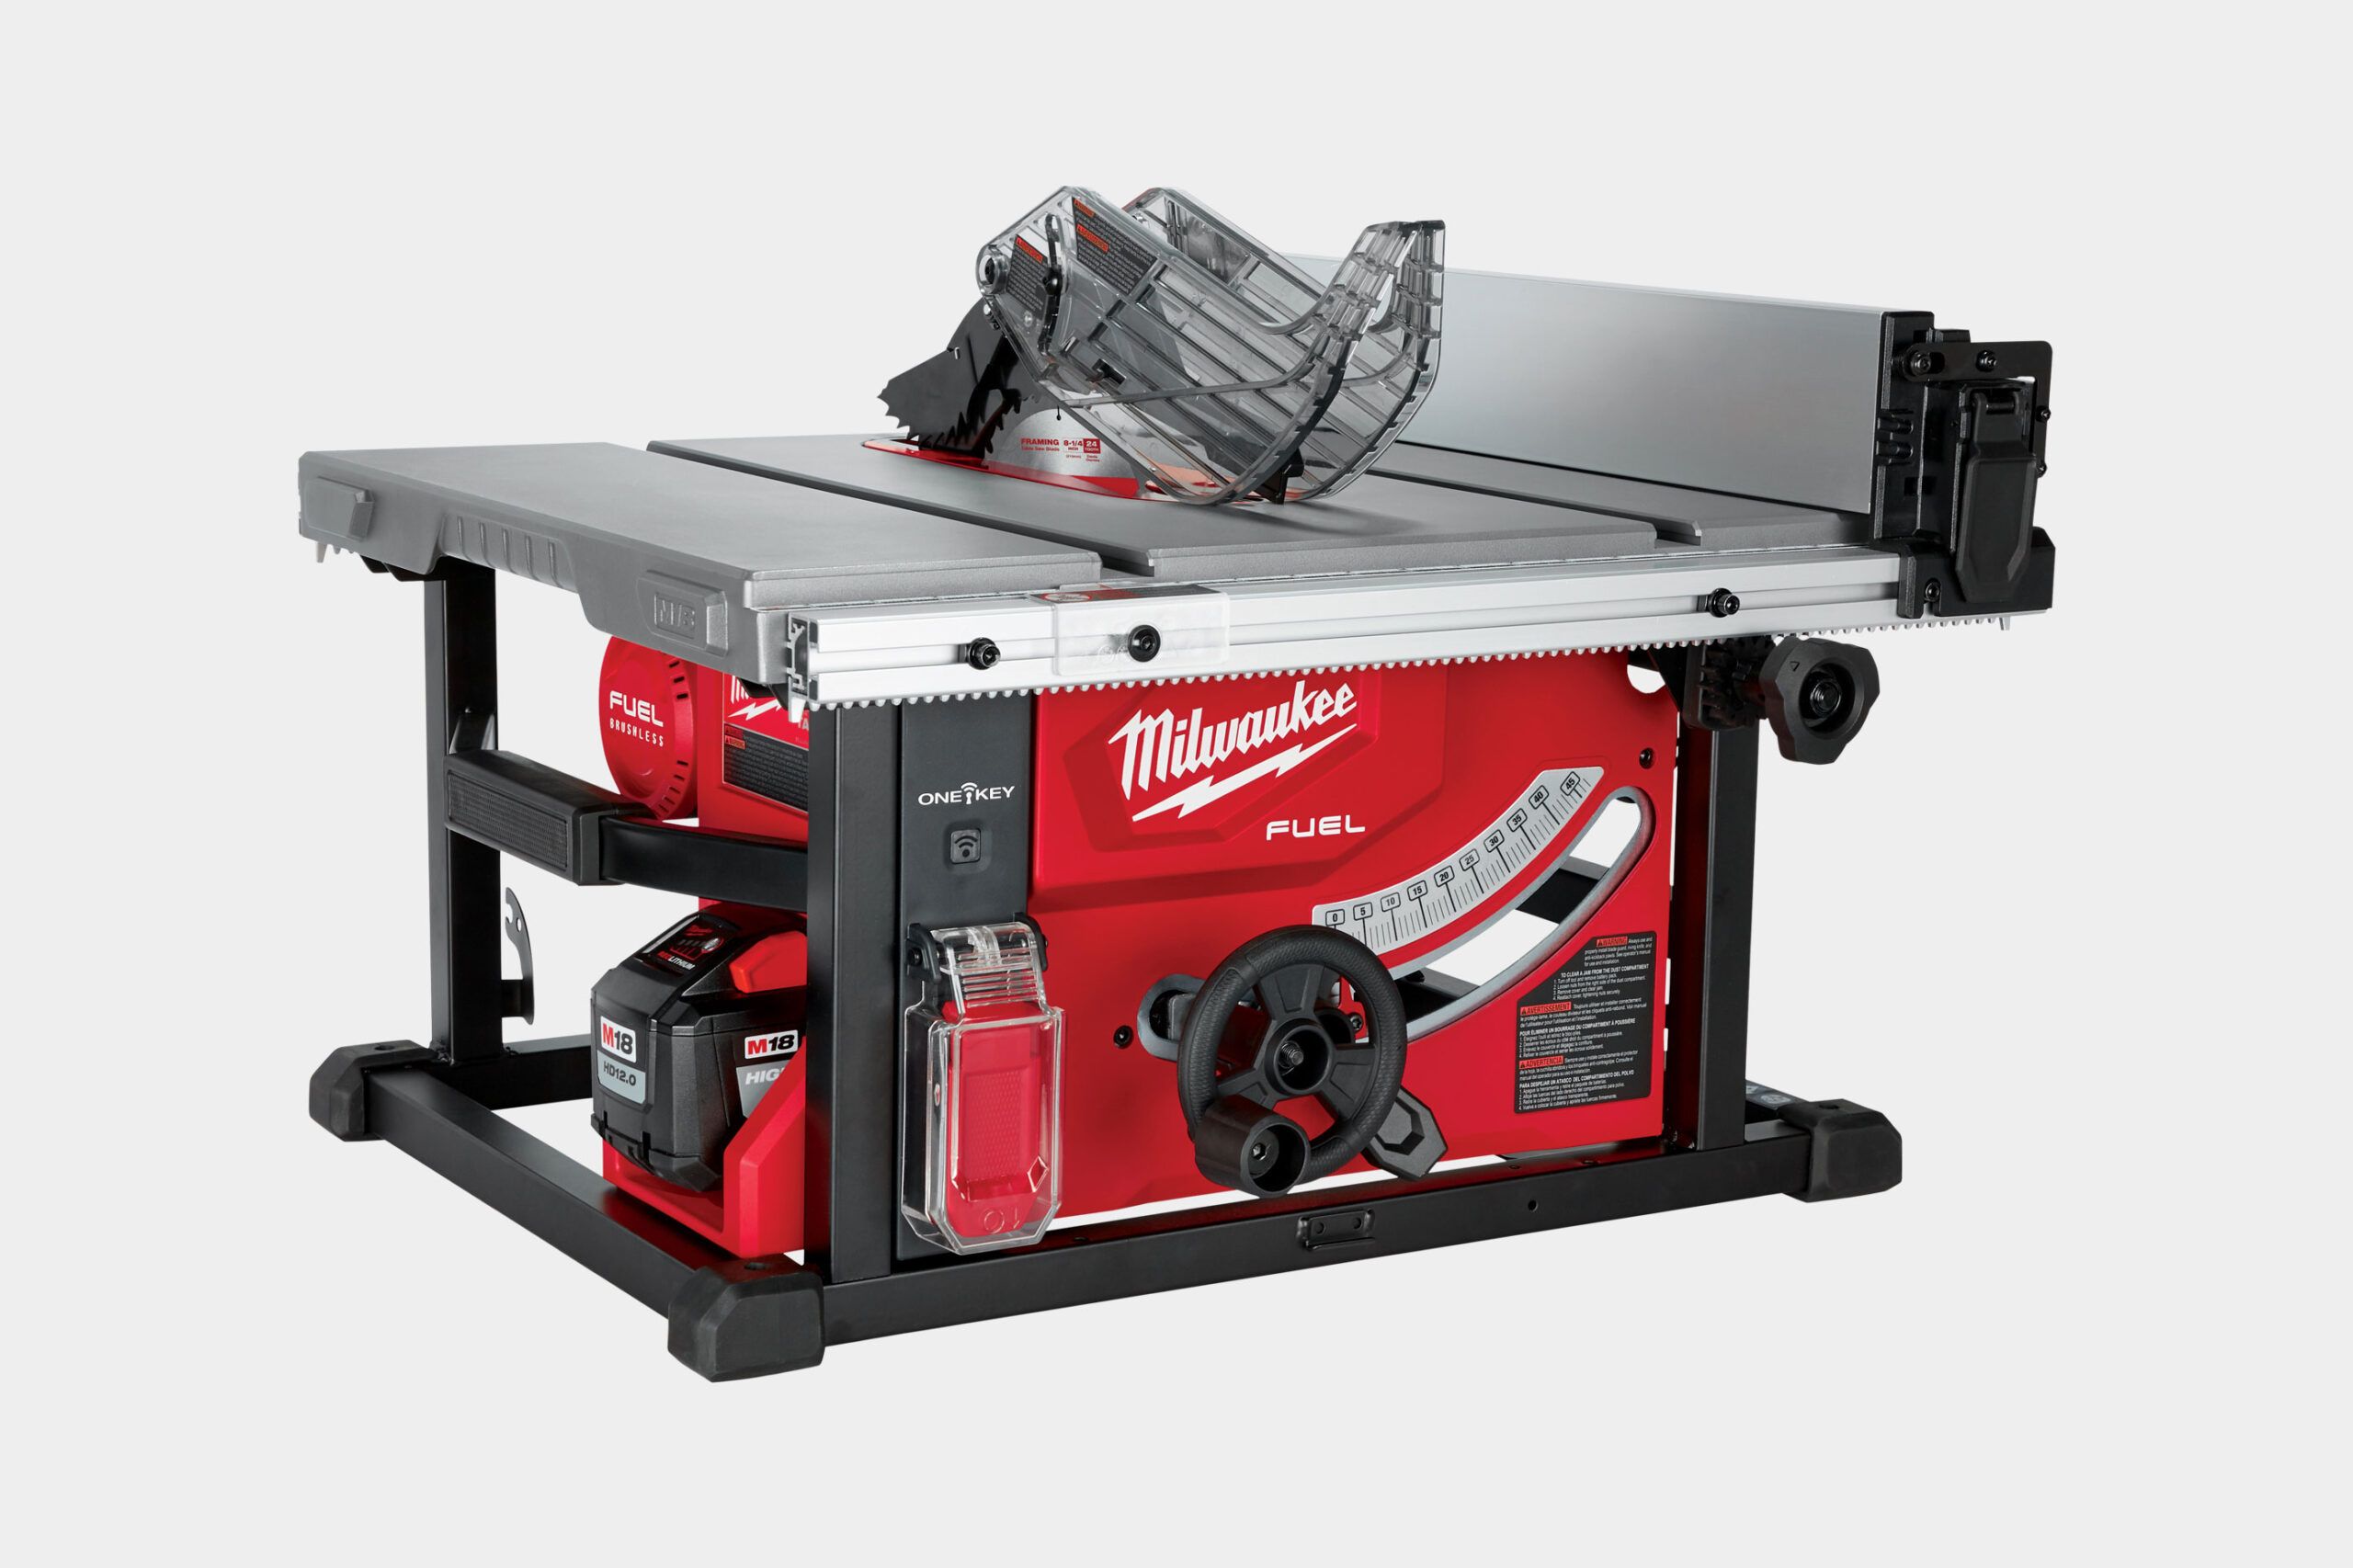 M18 Fuel 8¼" Table Saw with One-Key